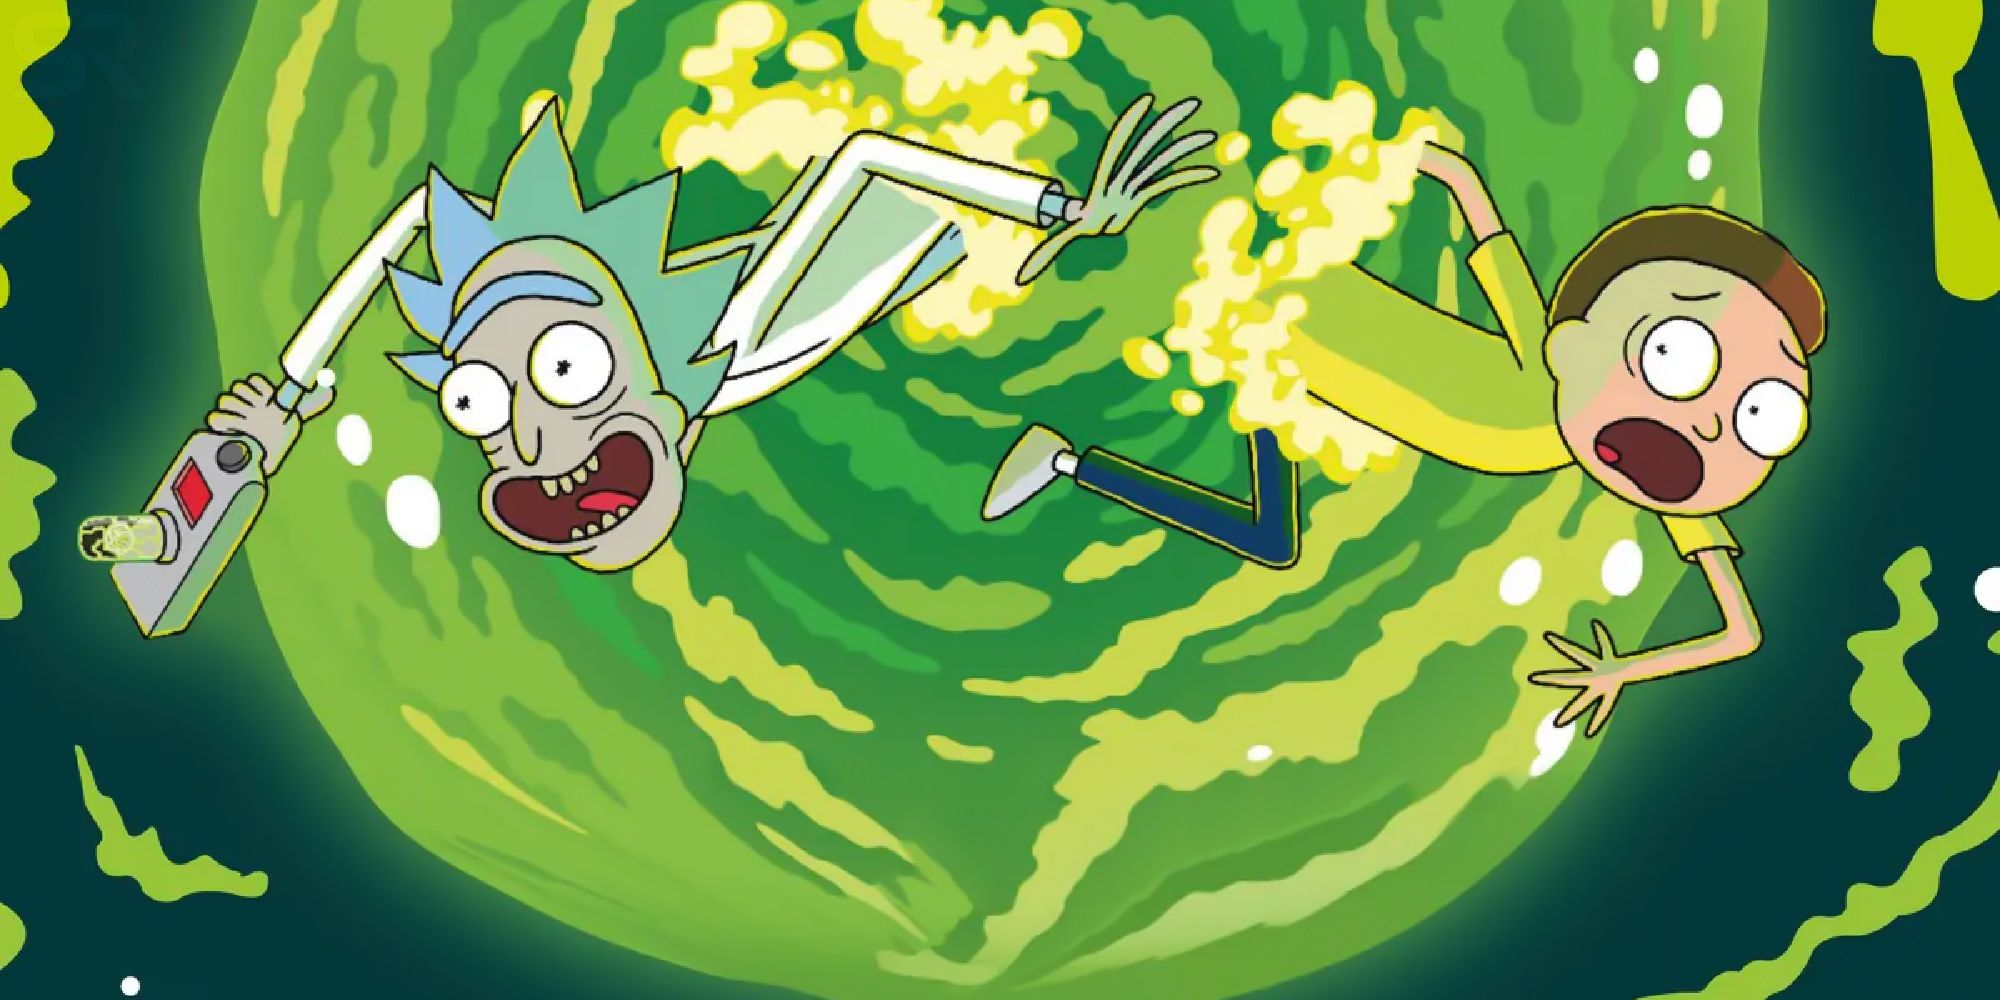 Rick and Morty falling through a portal